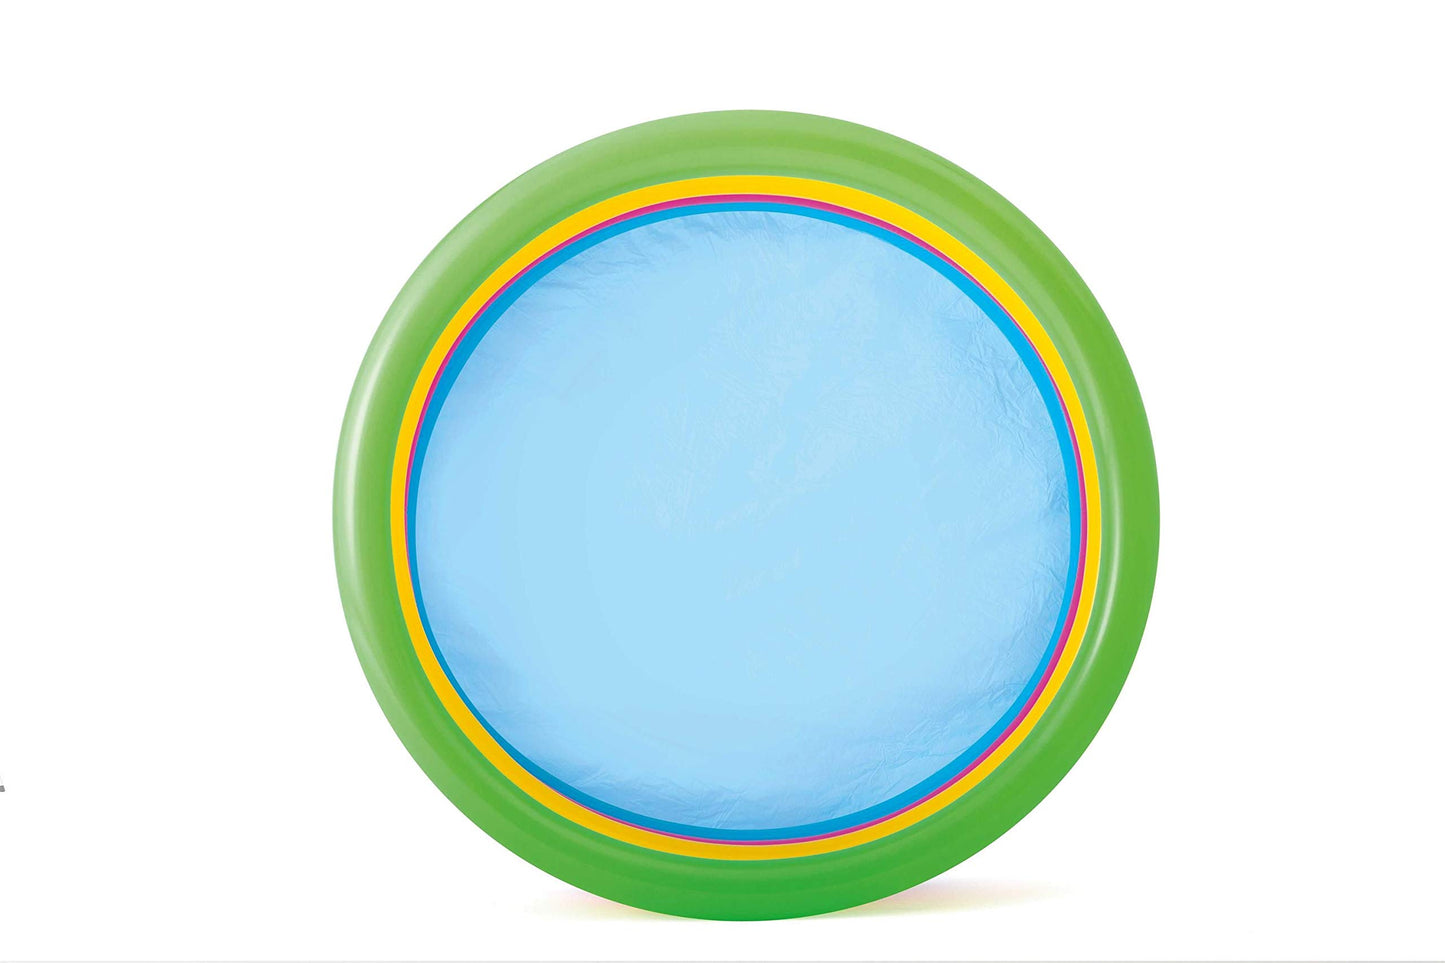 BESTWAY Multicolor 4-ring rainbow Swimming Pool for kids 62in x 18in